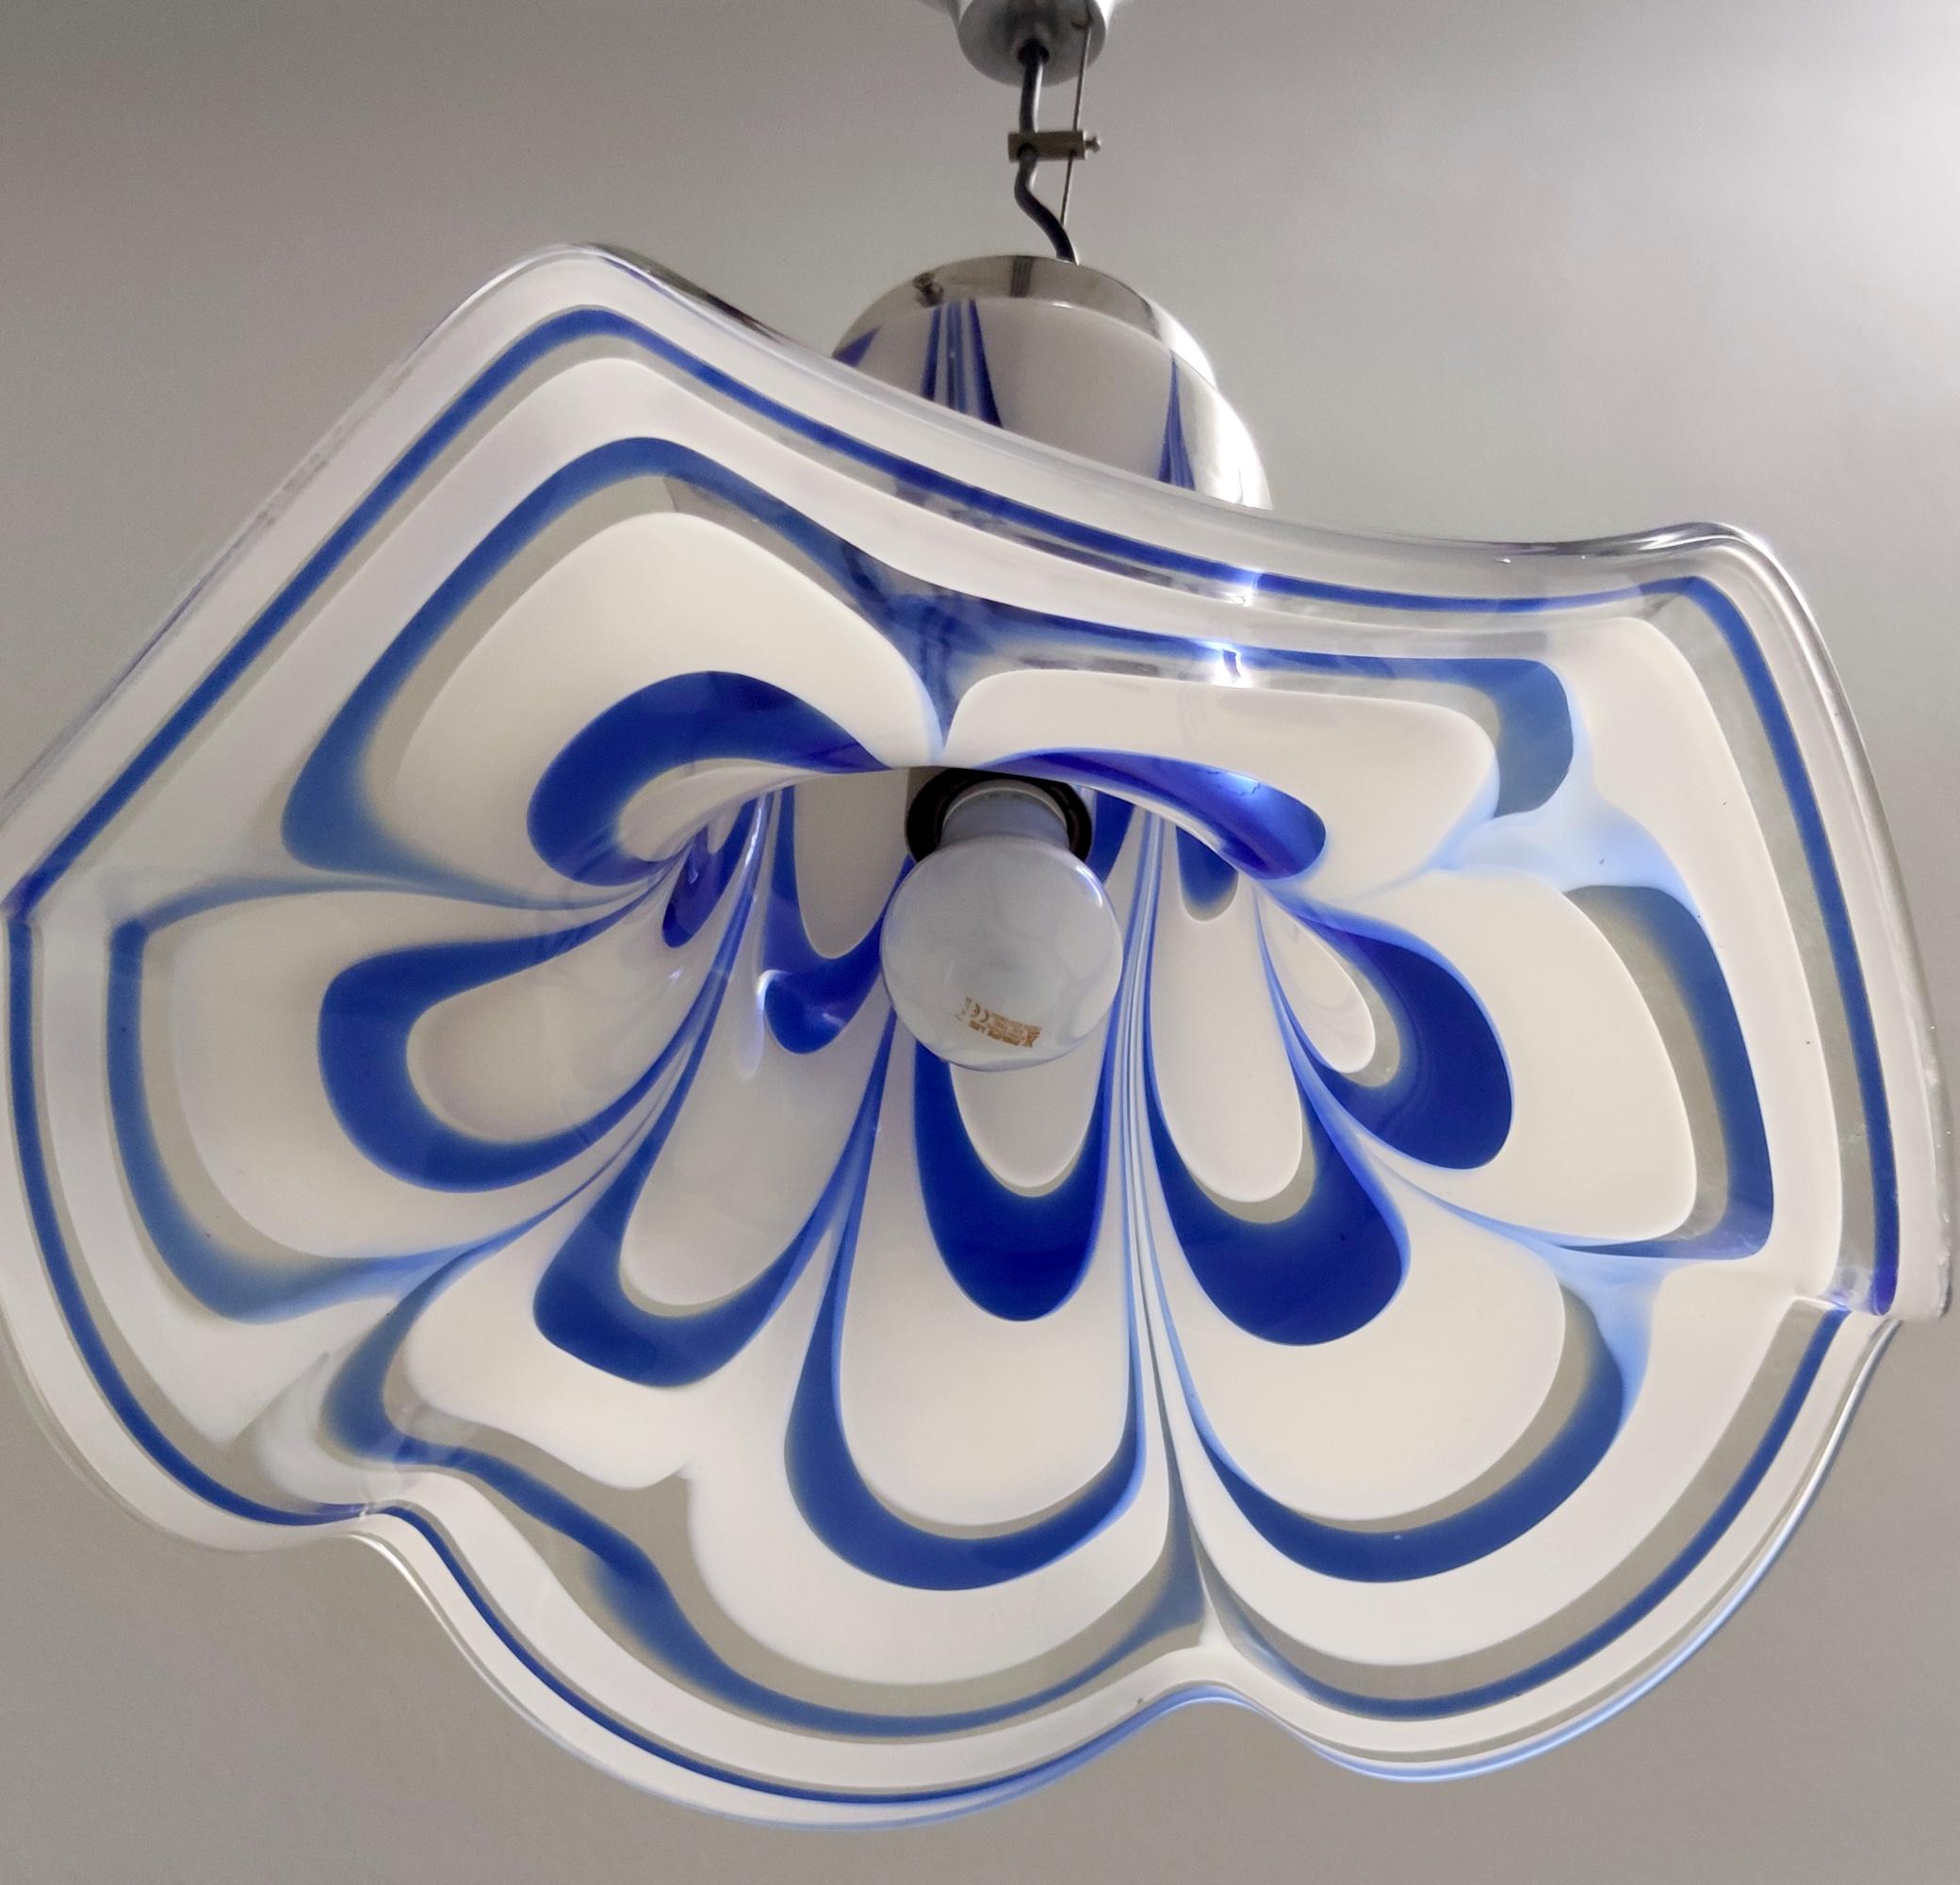 Postmodern Blue & White Murano Glass Pendant Ascribable to Mazzega, Italy, 1970s For Sale 2